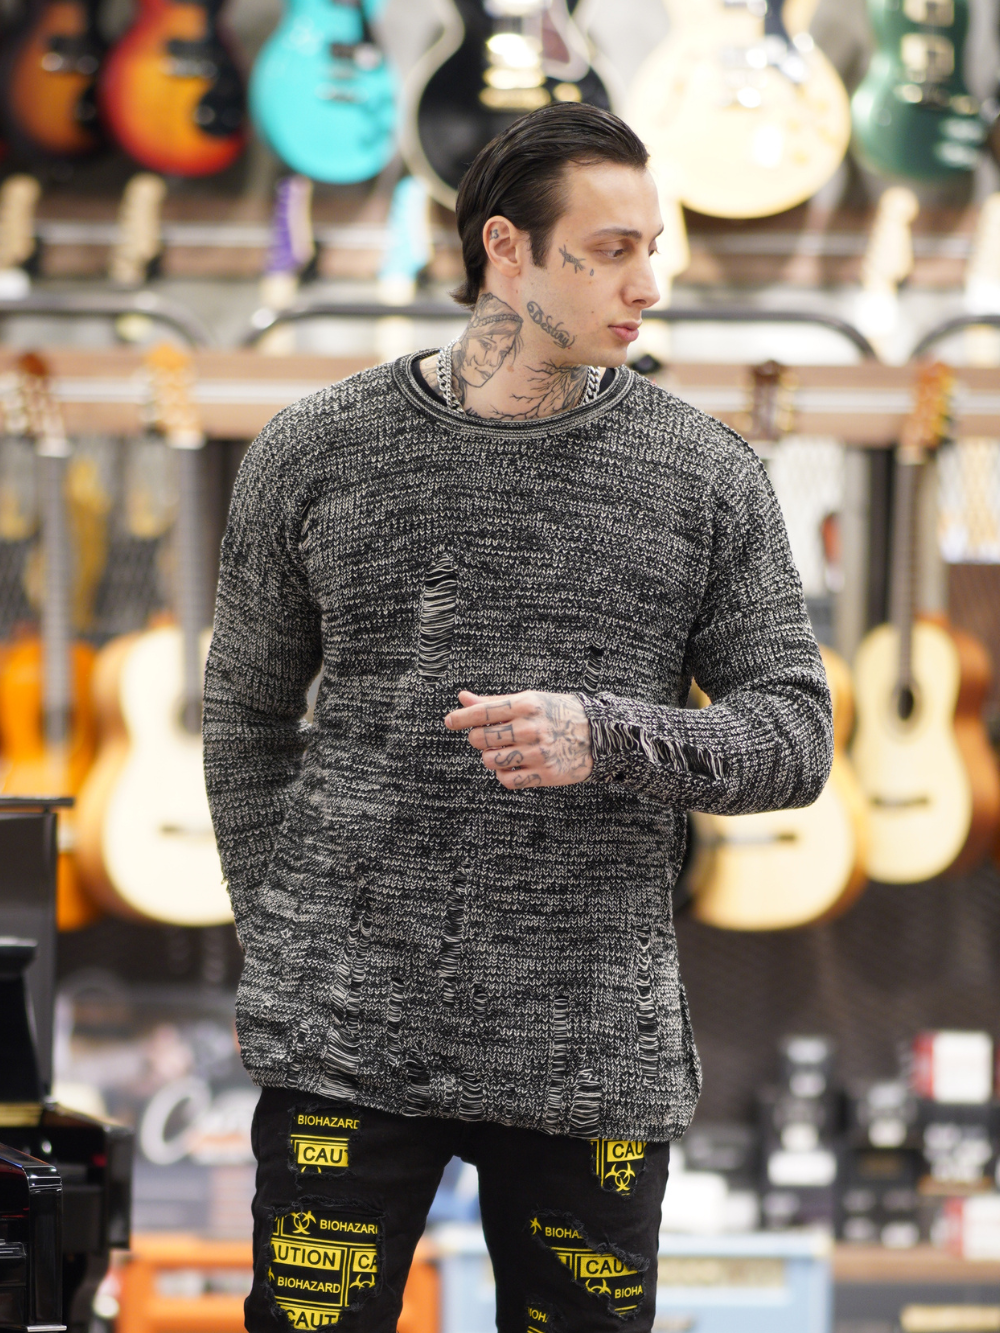 A distressed man with tattoos standing in front of a Distressed Gentleman Sweater shop.